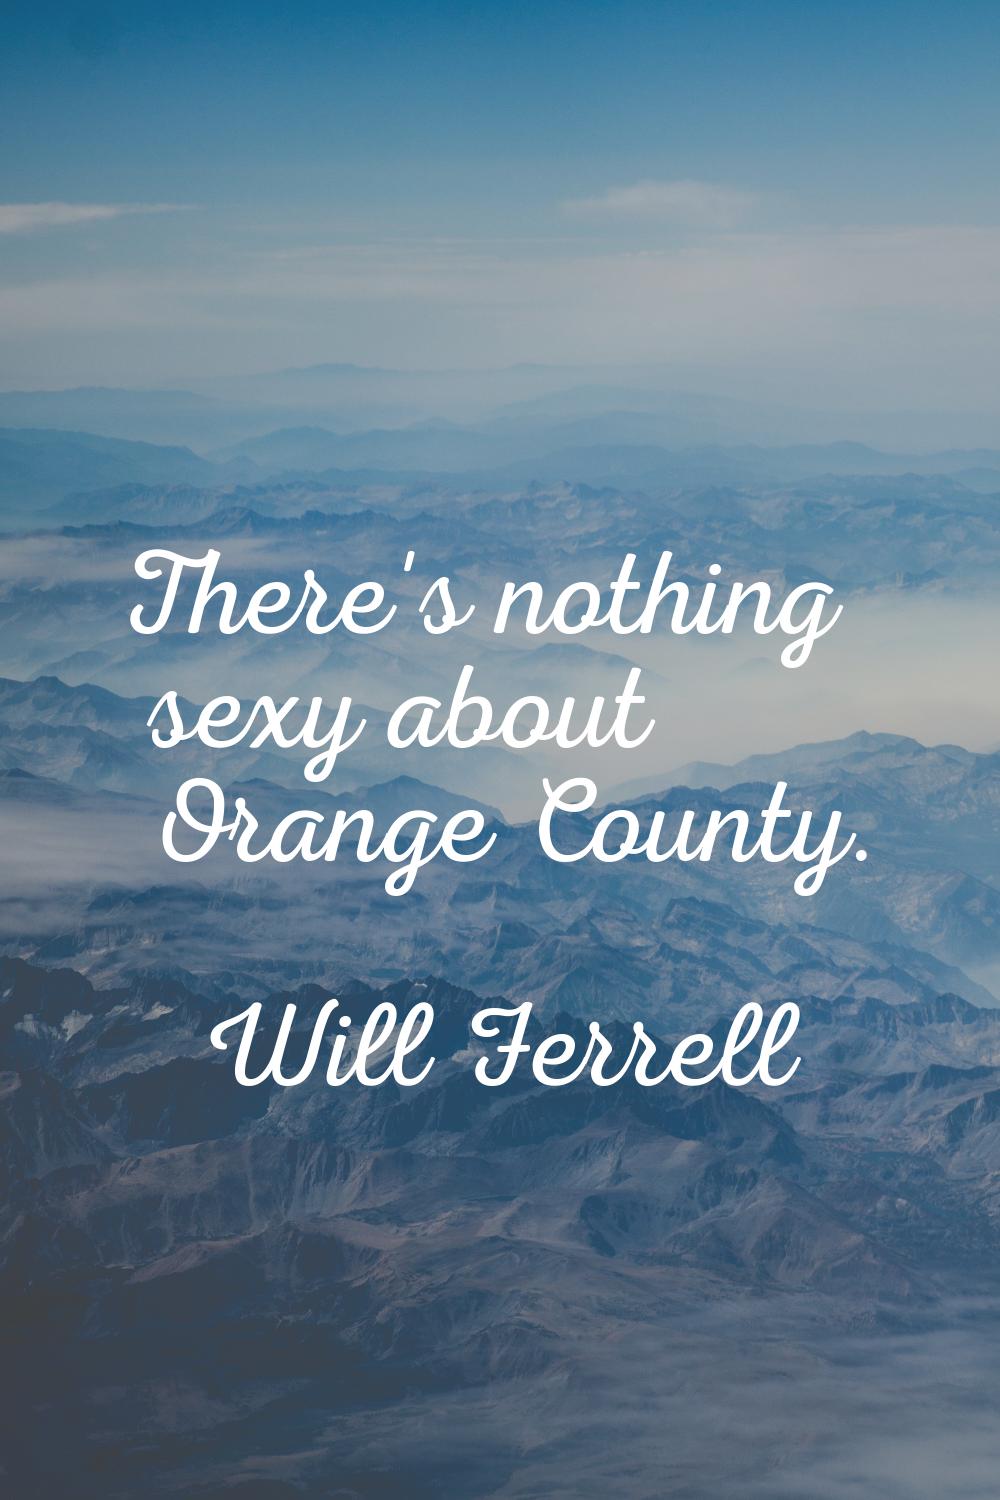 There's nothing sexy about Orange County.